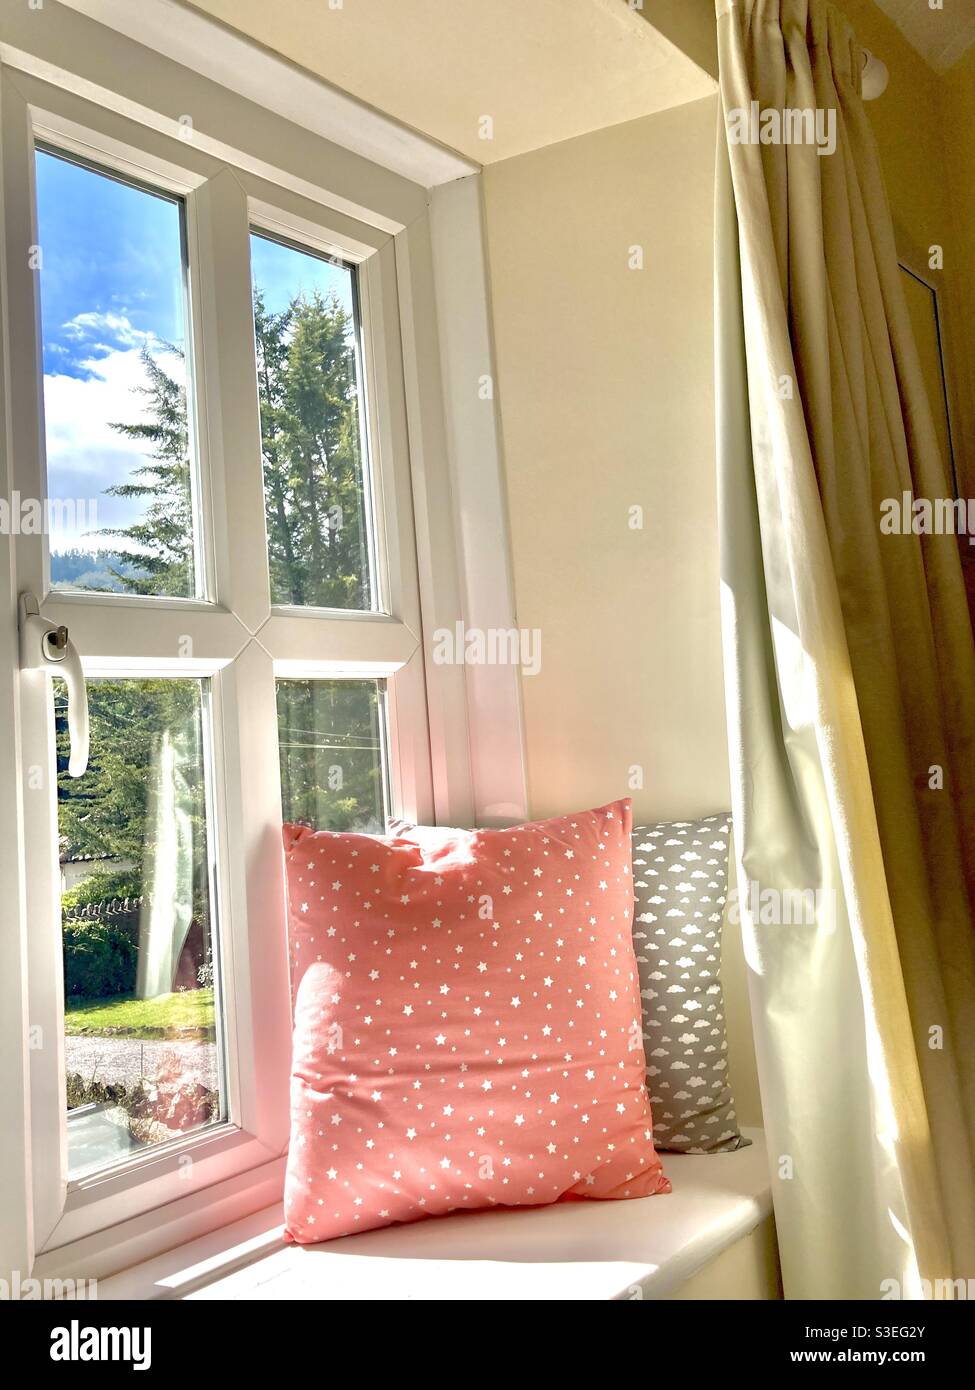 Window seat in the sun with coral and grey cushions and cream curtains. Stock Photo